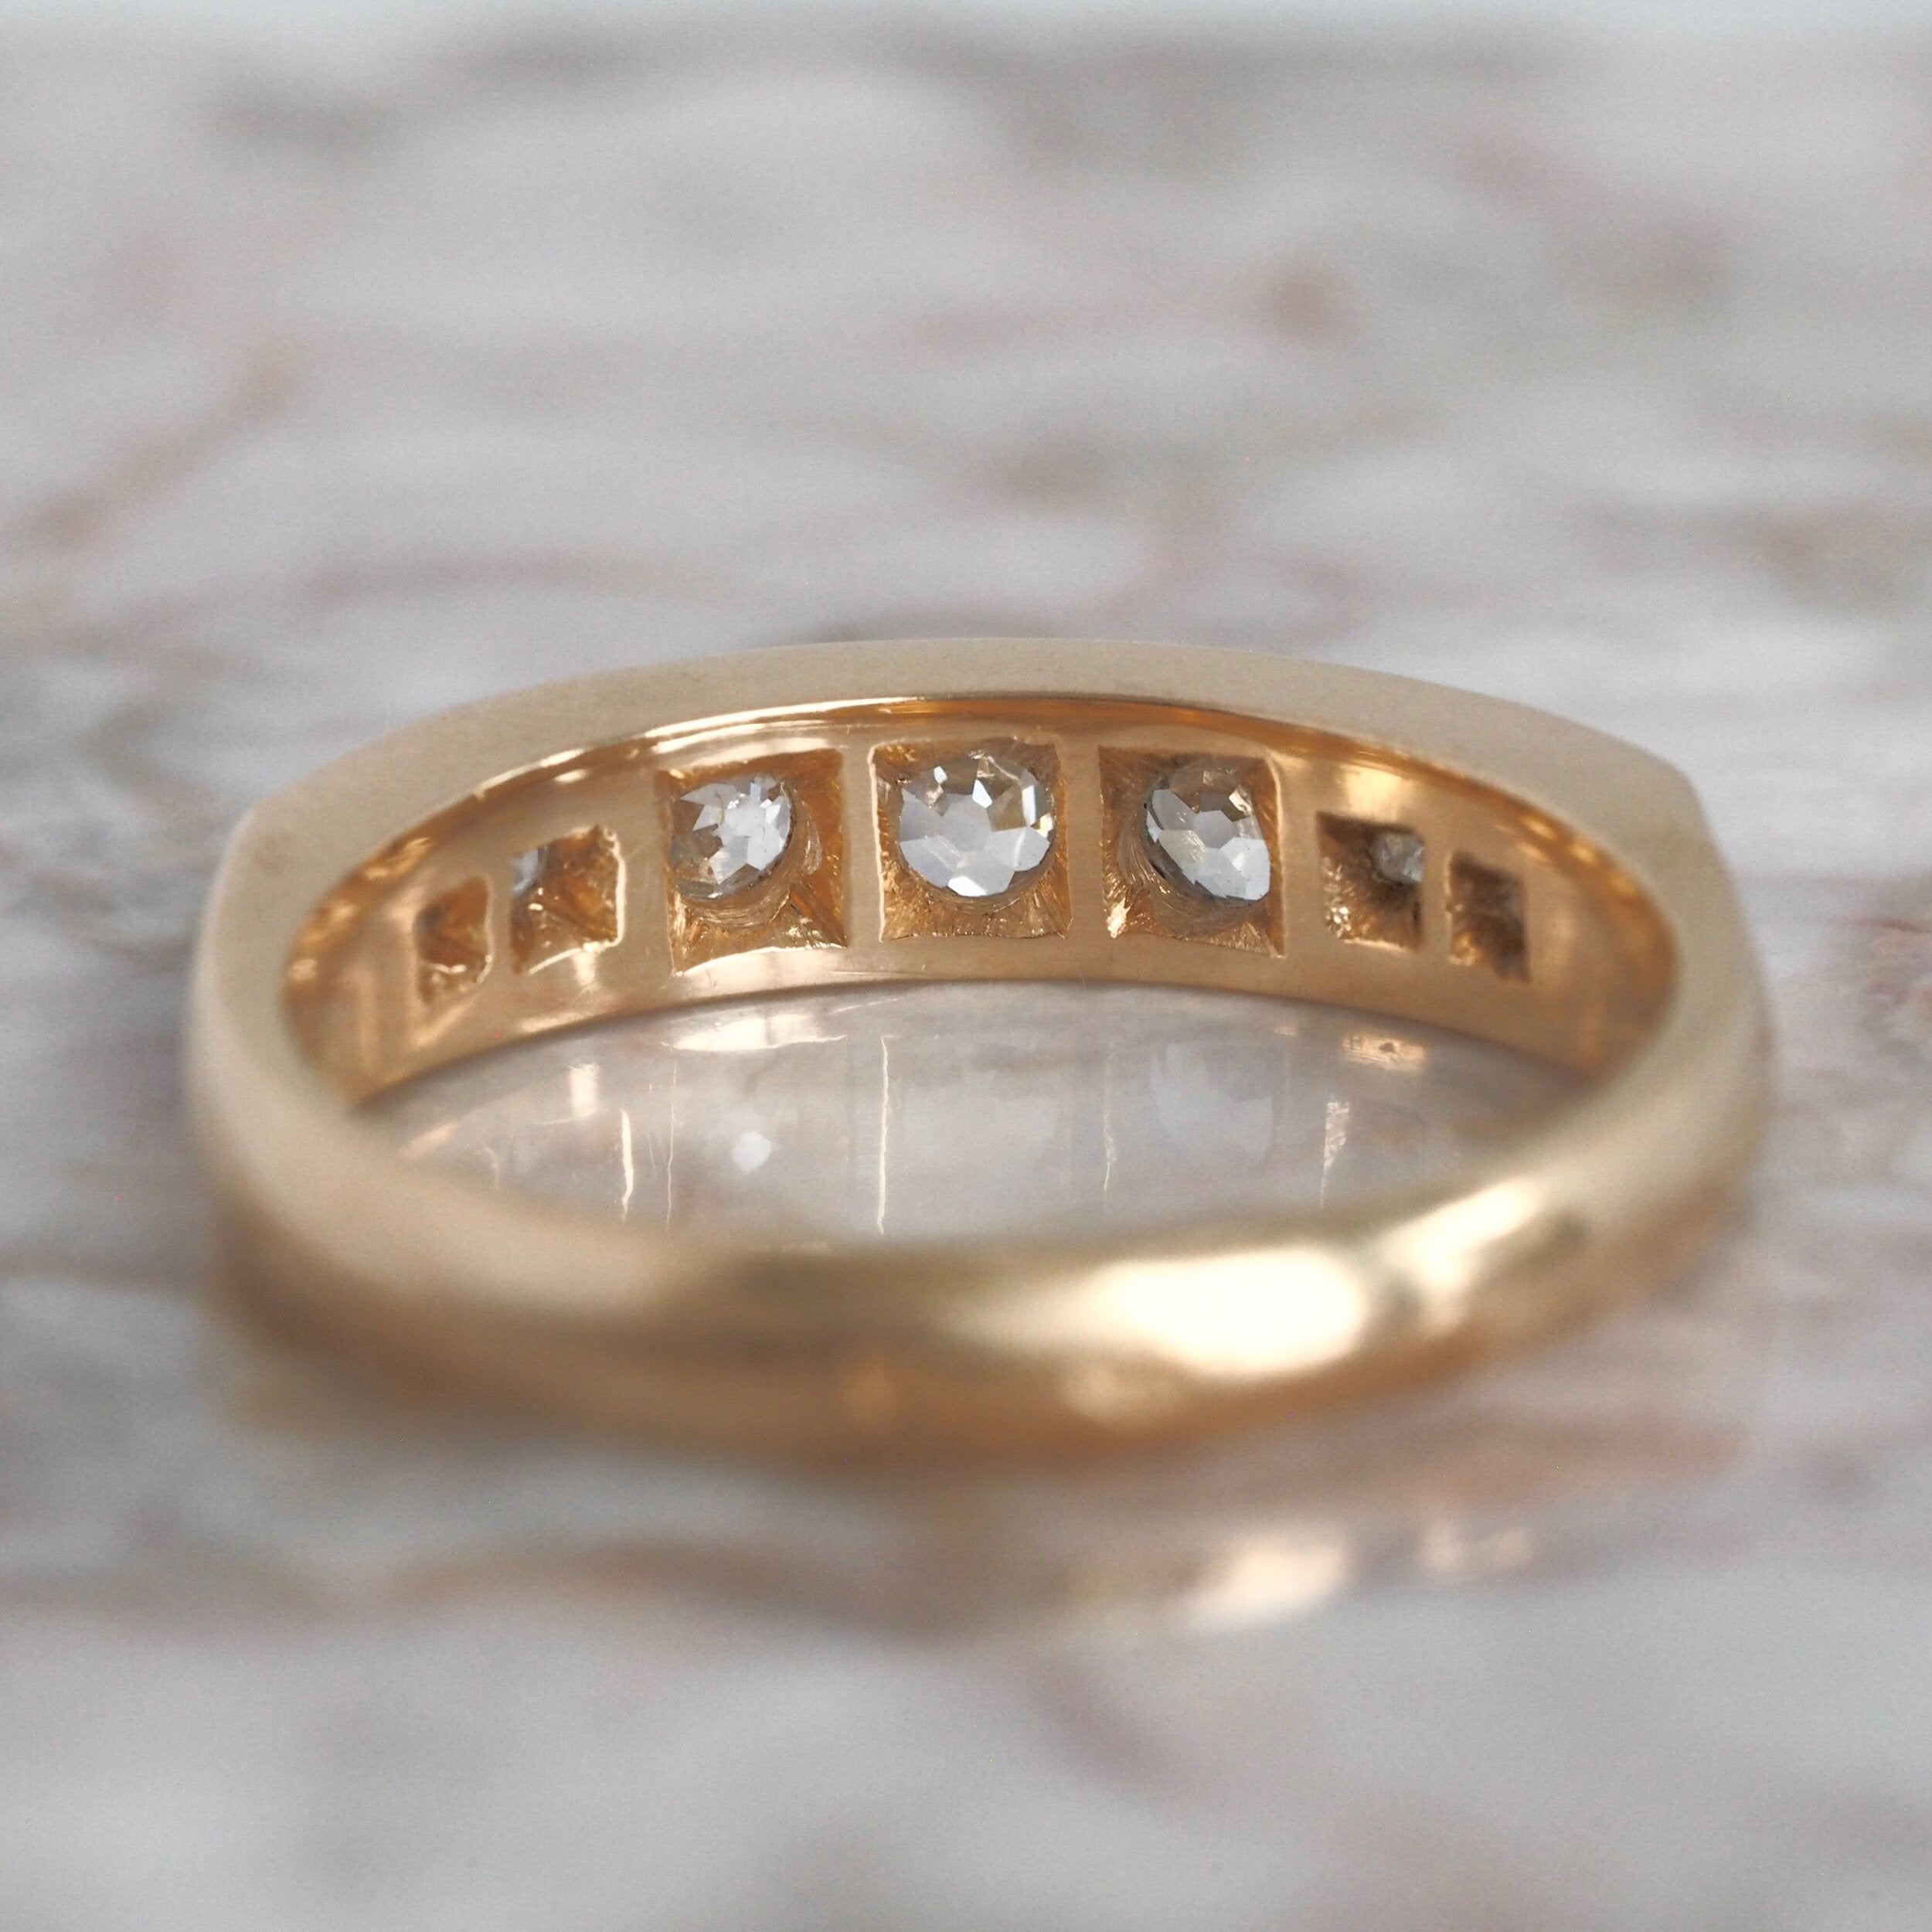 Antique French 18k Gold Old Mine Cut Half Hoop Diamond Ring